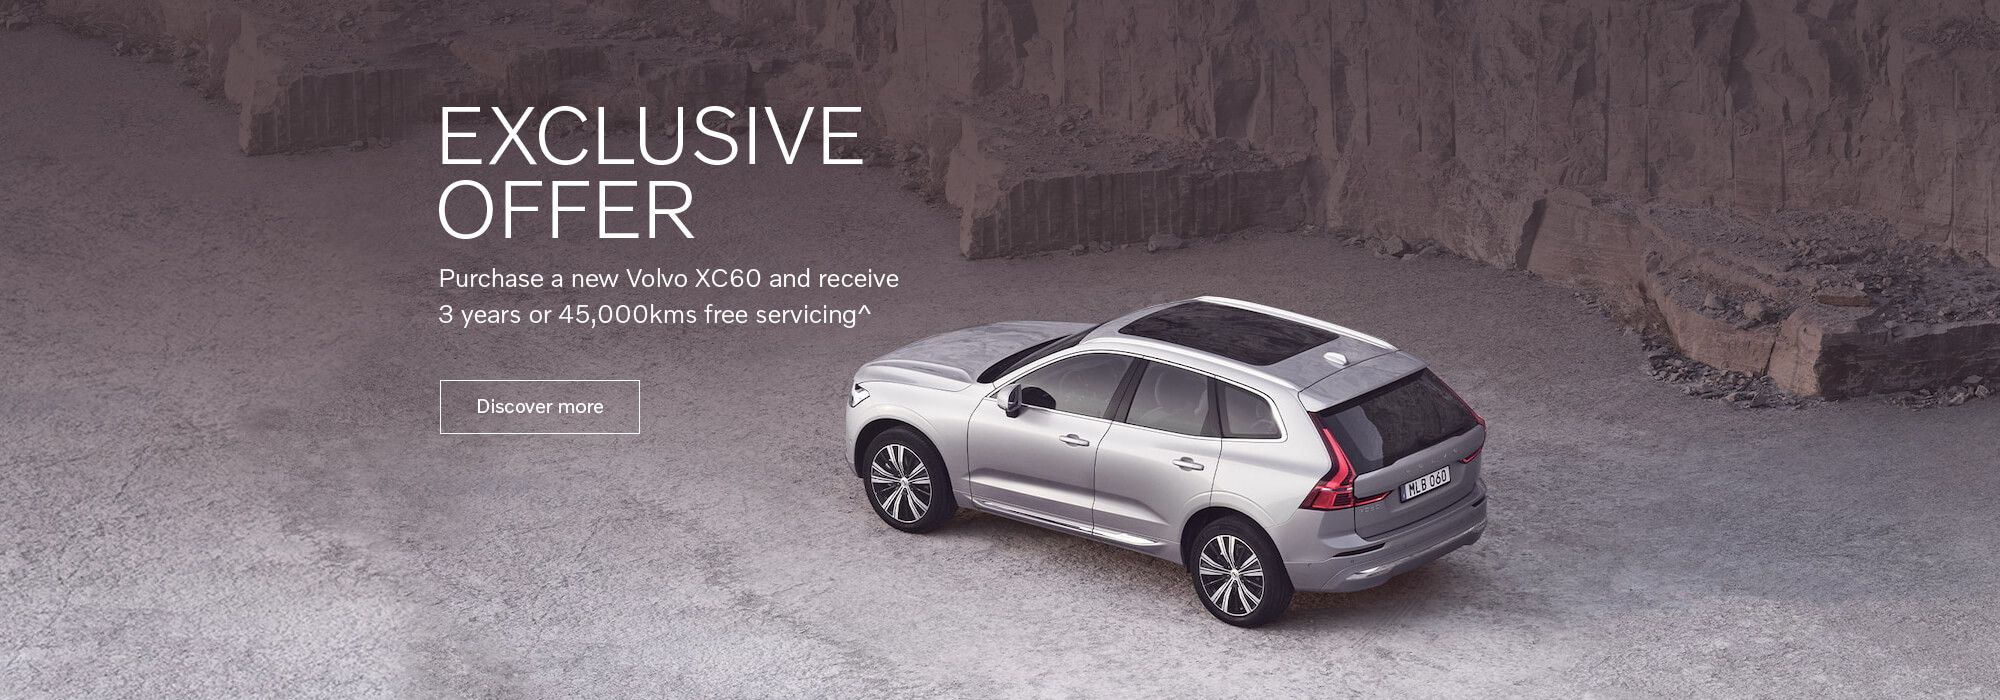 Purchase a new Volvo XC60 and receive 3 years or 45,000kms free servicing